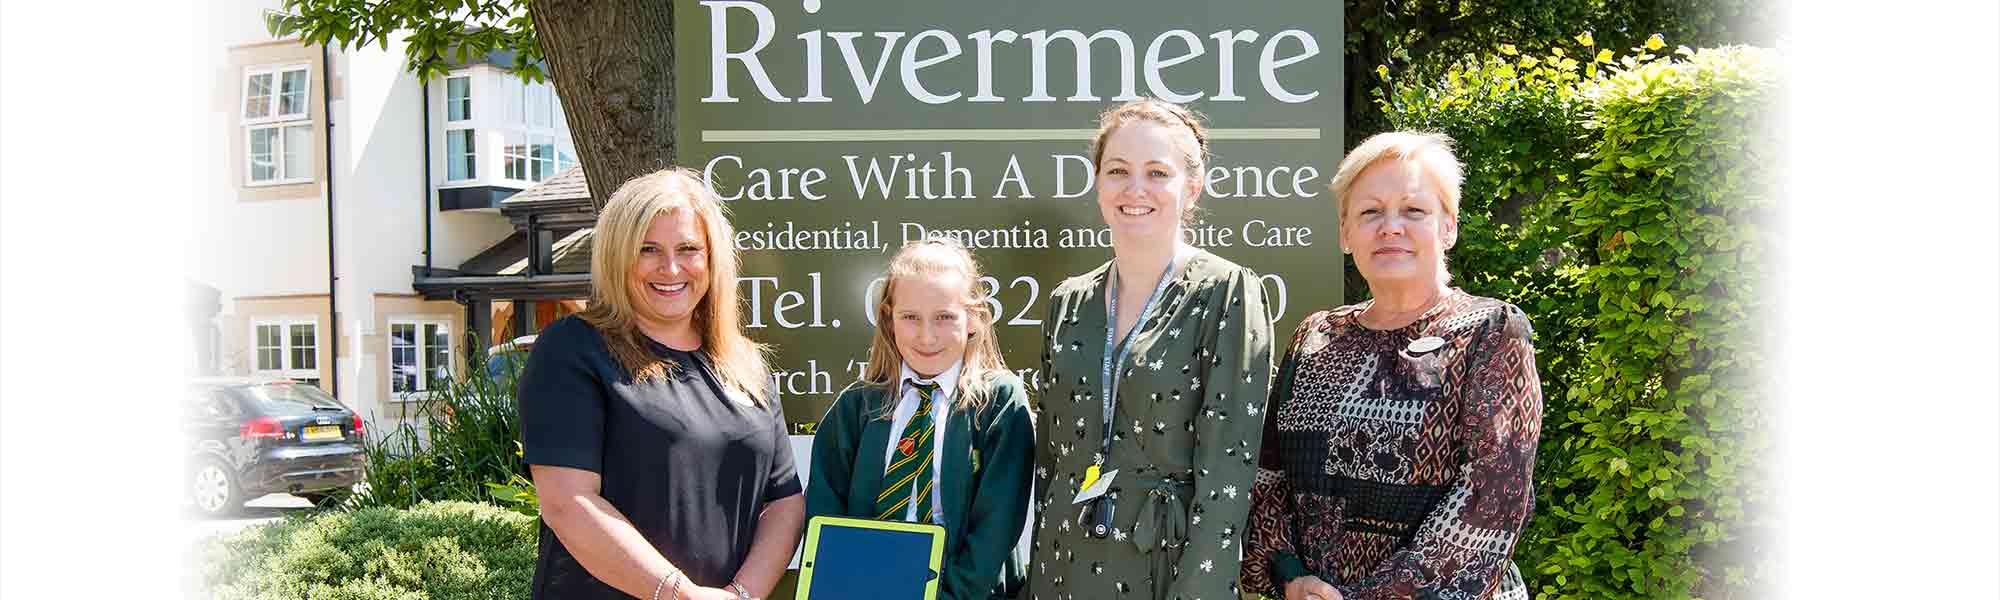 Rivermere Care Home iPad presentation holly school student